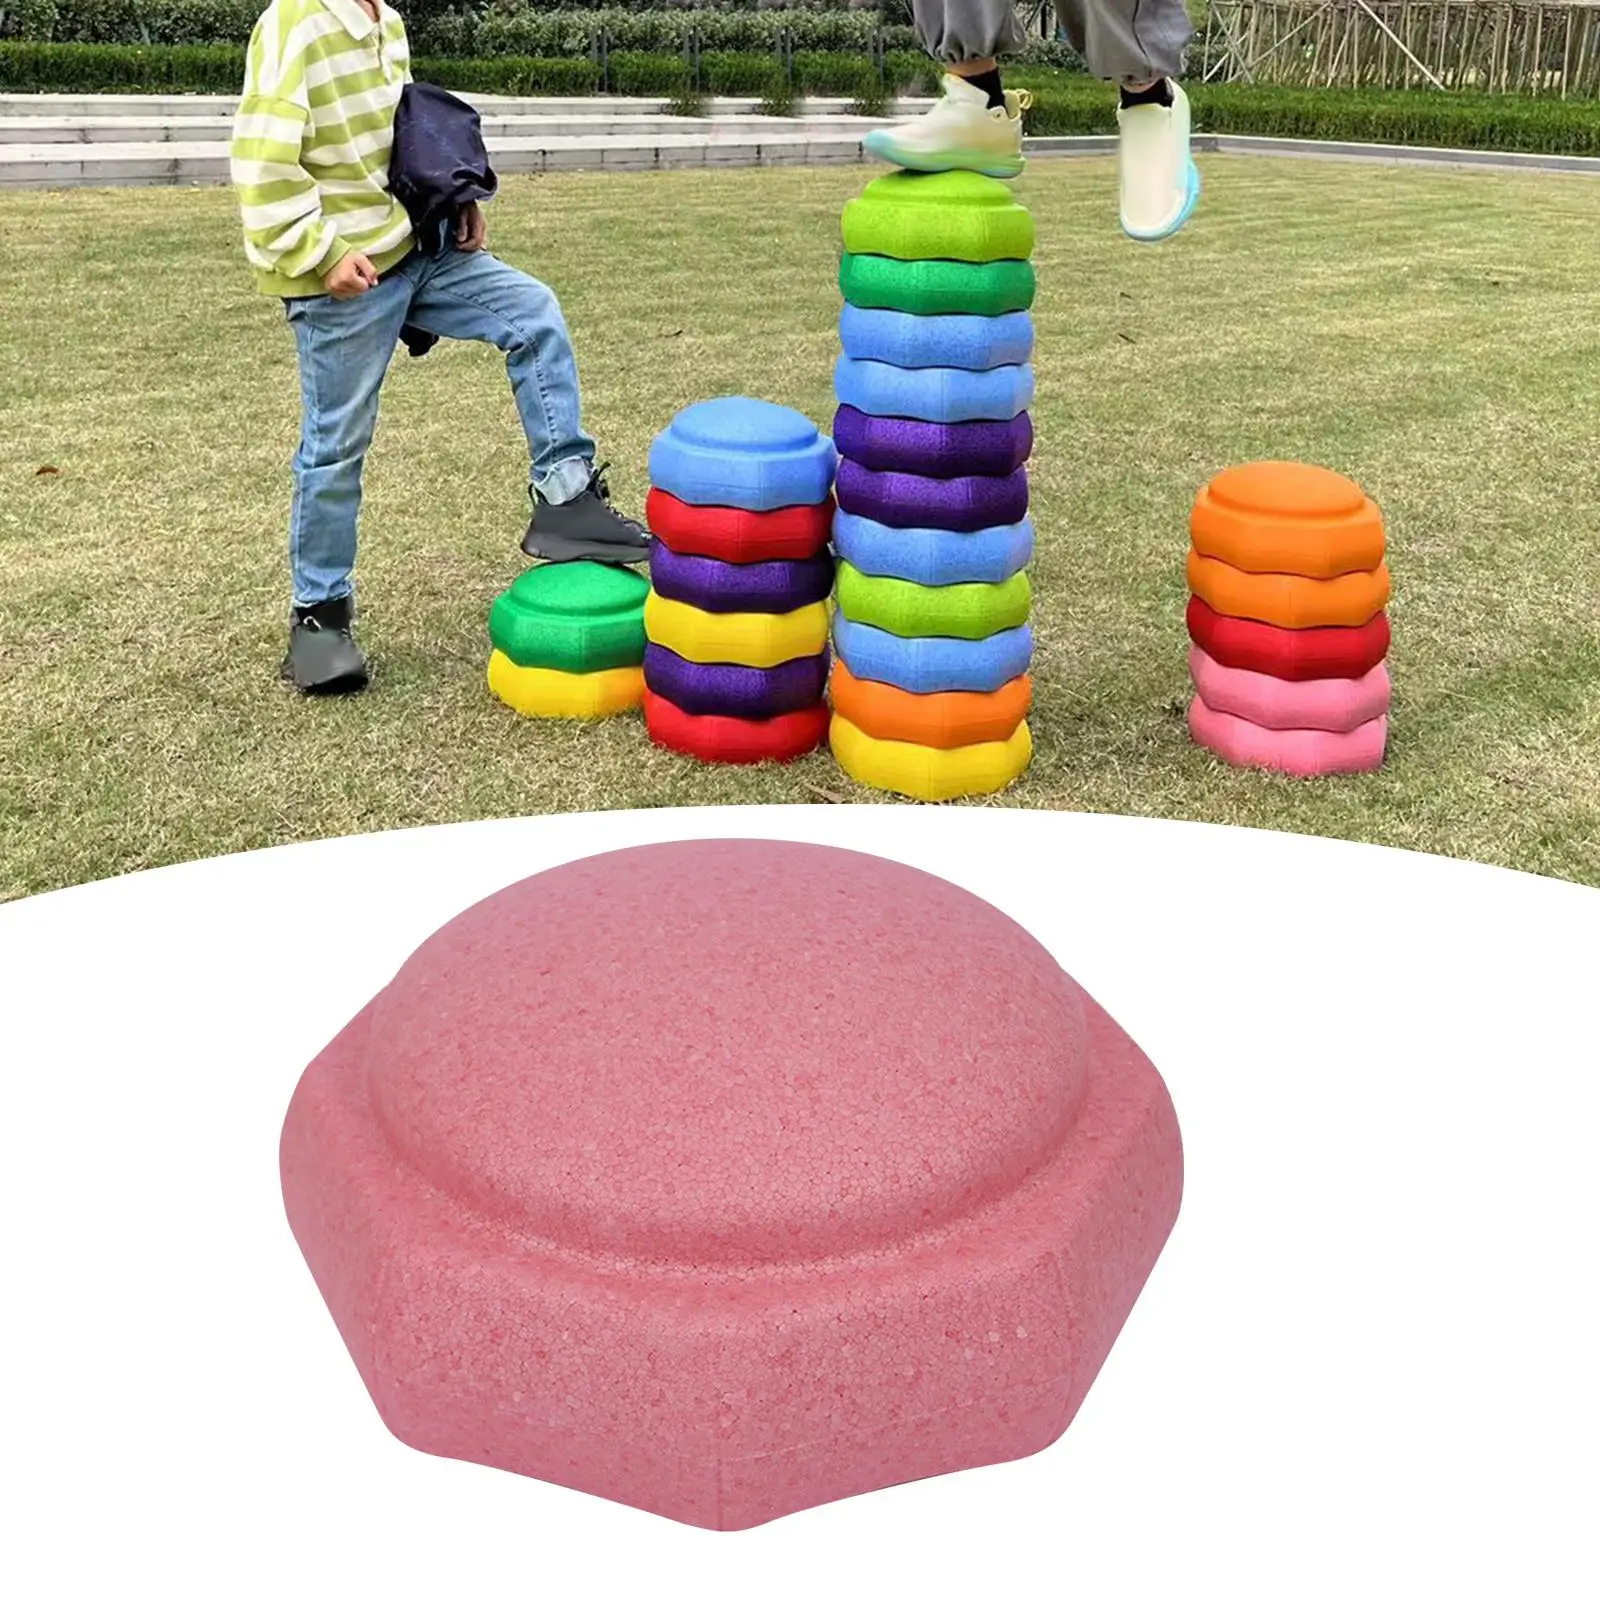 

Stepping Stone Diameter Kids Ages 3 Years and up Indoor Outdoor Playing Equipment Balance Training Toy Crossing River Stone